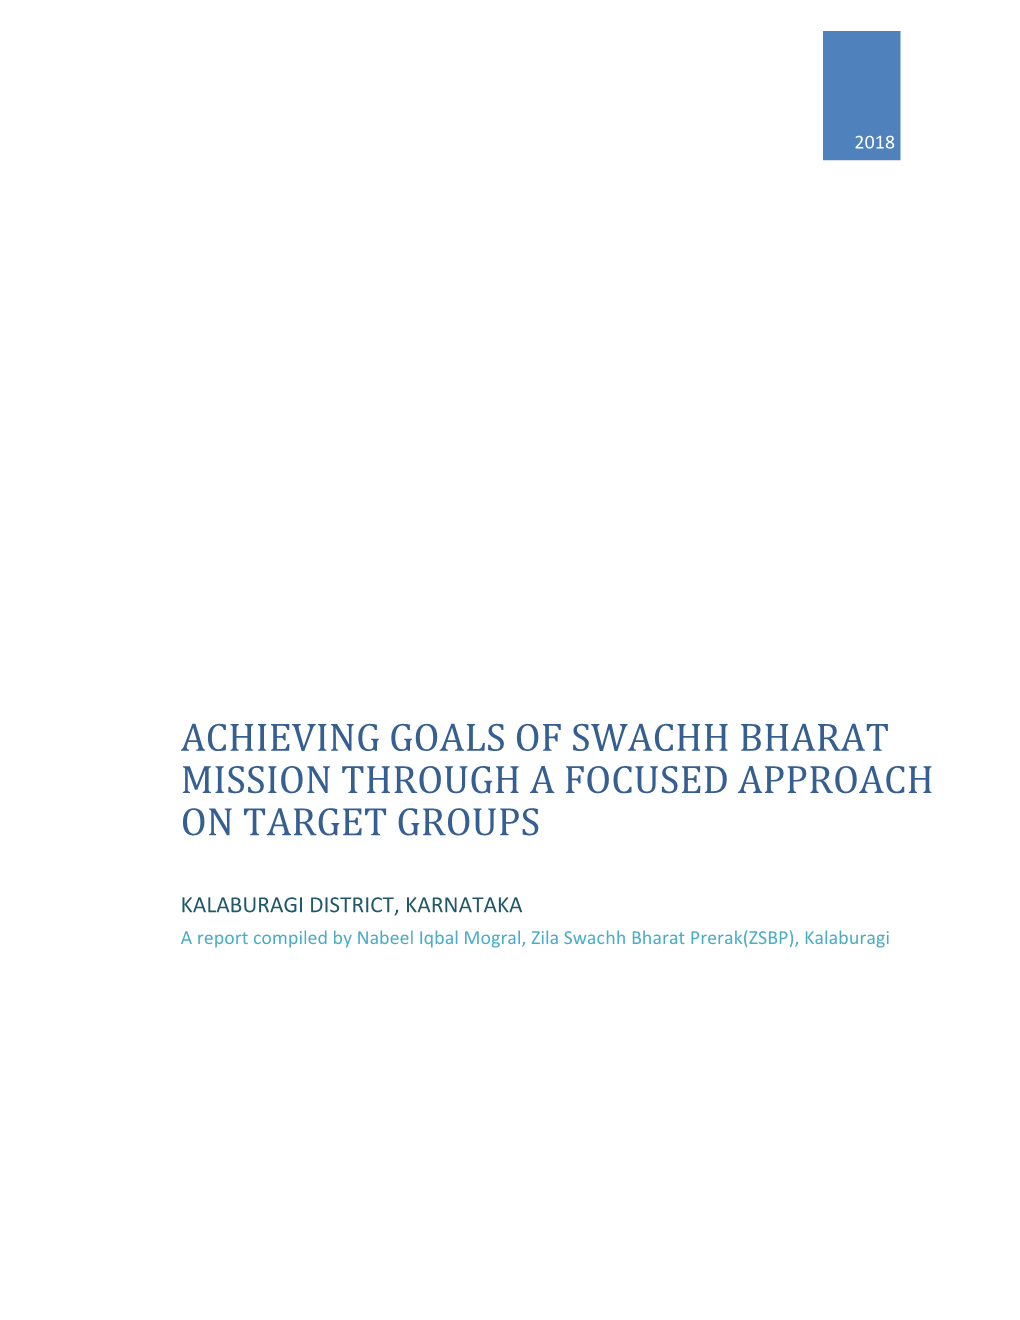 Achieving Goals of Swachh Bharat Mission Through a Focused Approach on Target Groups